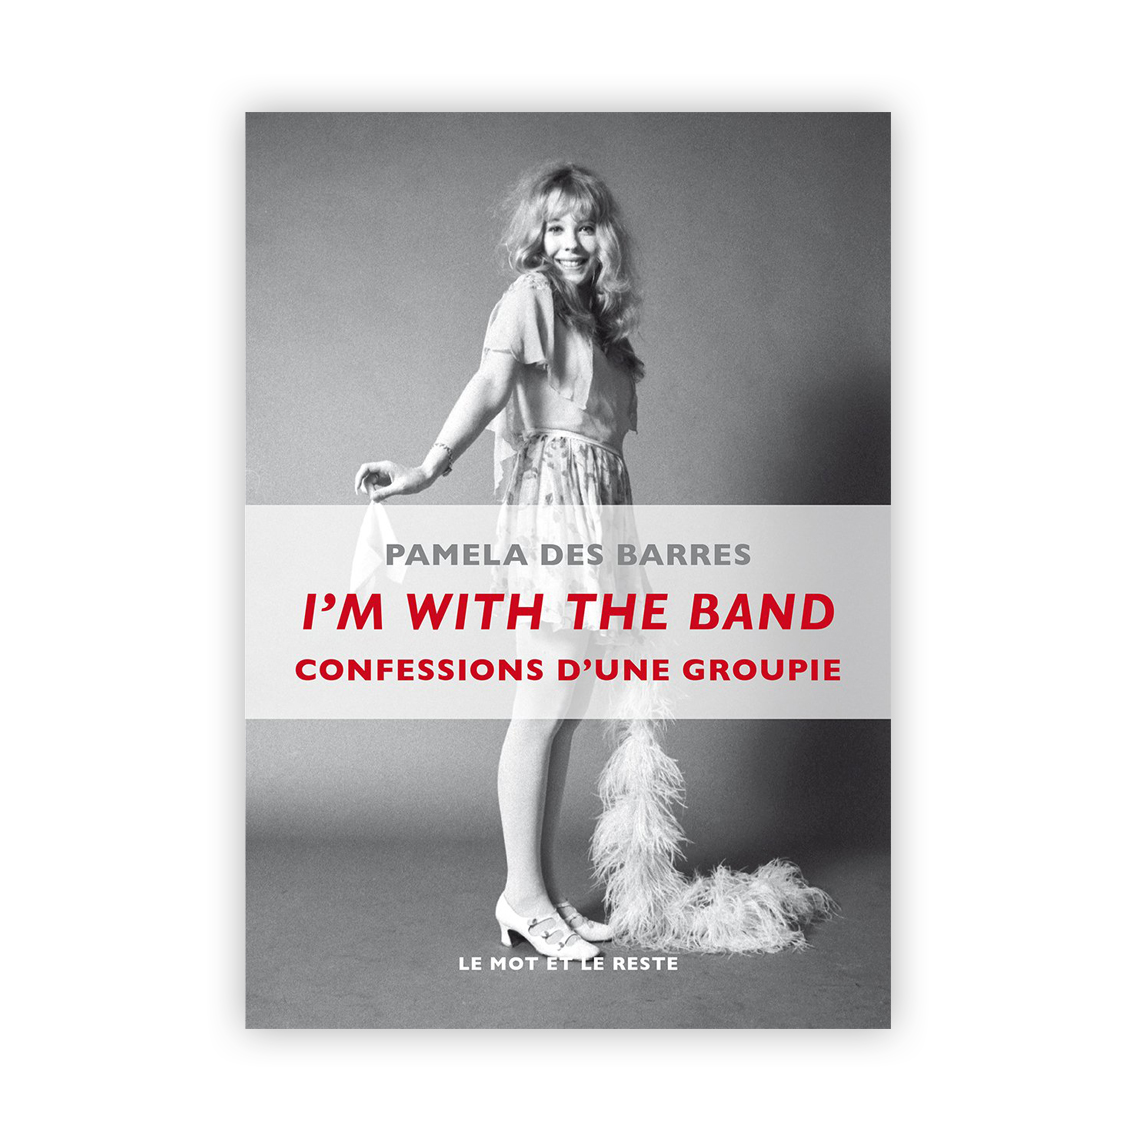 01 I'm With the Band- Confessions d'une groupie (MUSIQUES)